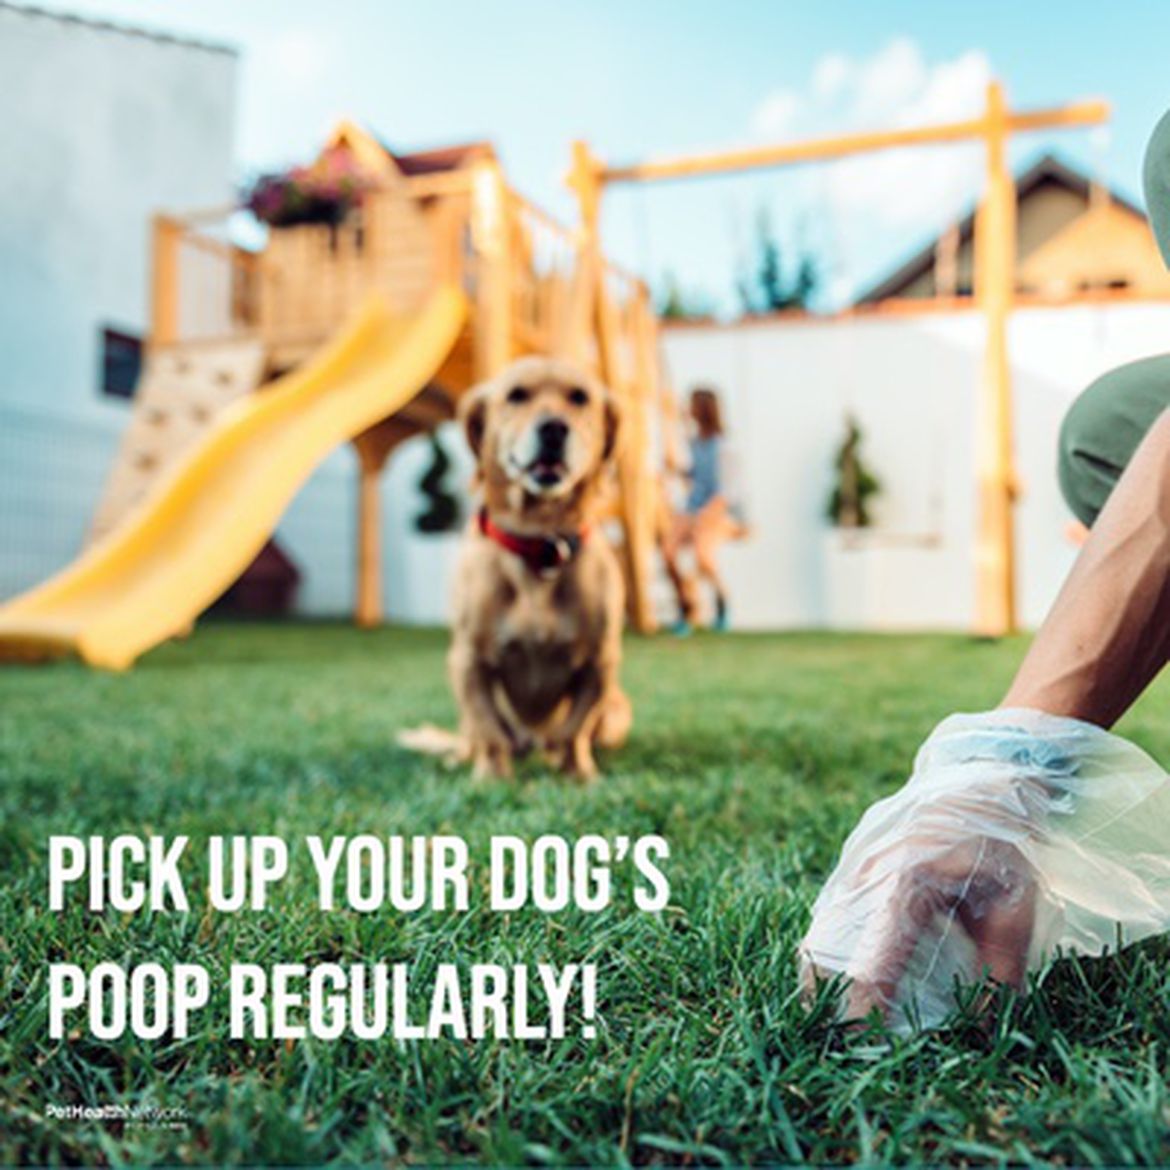 Social media post with a reminder on the importance of picking up your dog's poop regularly.